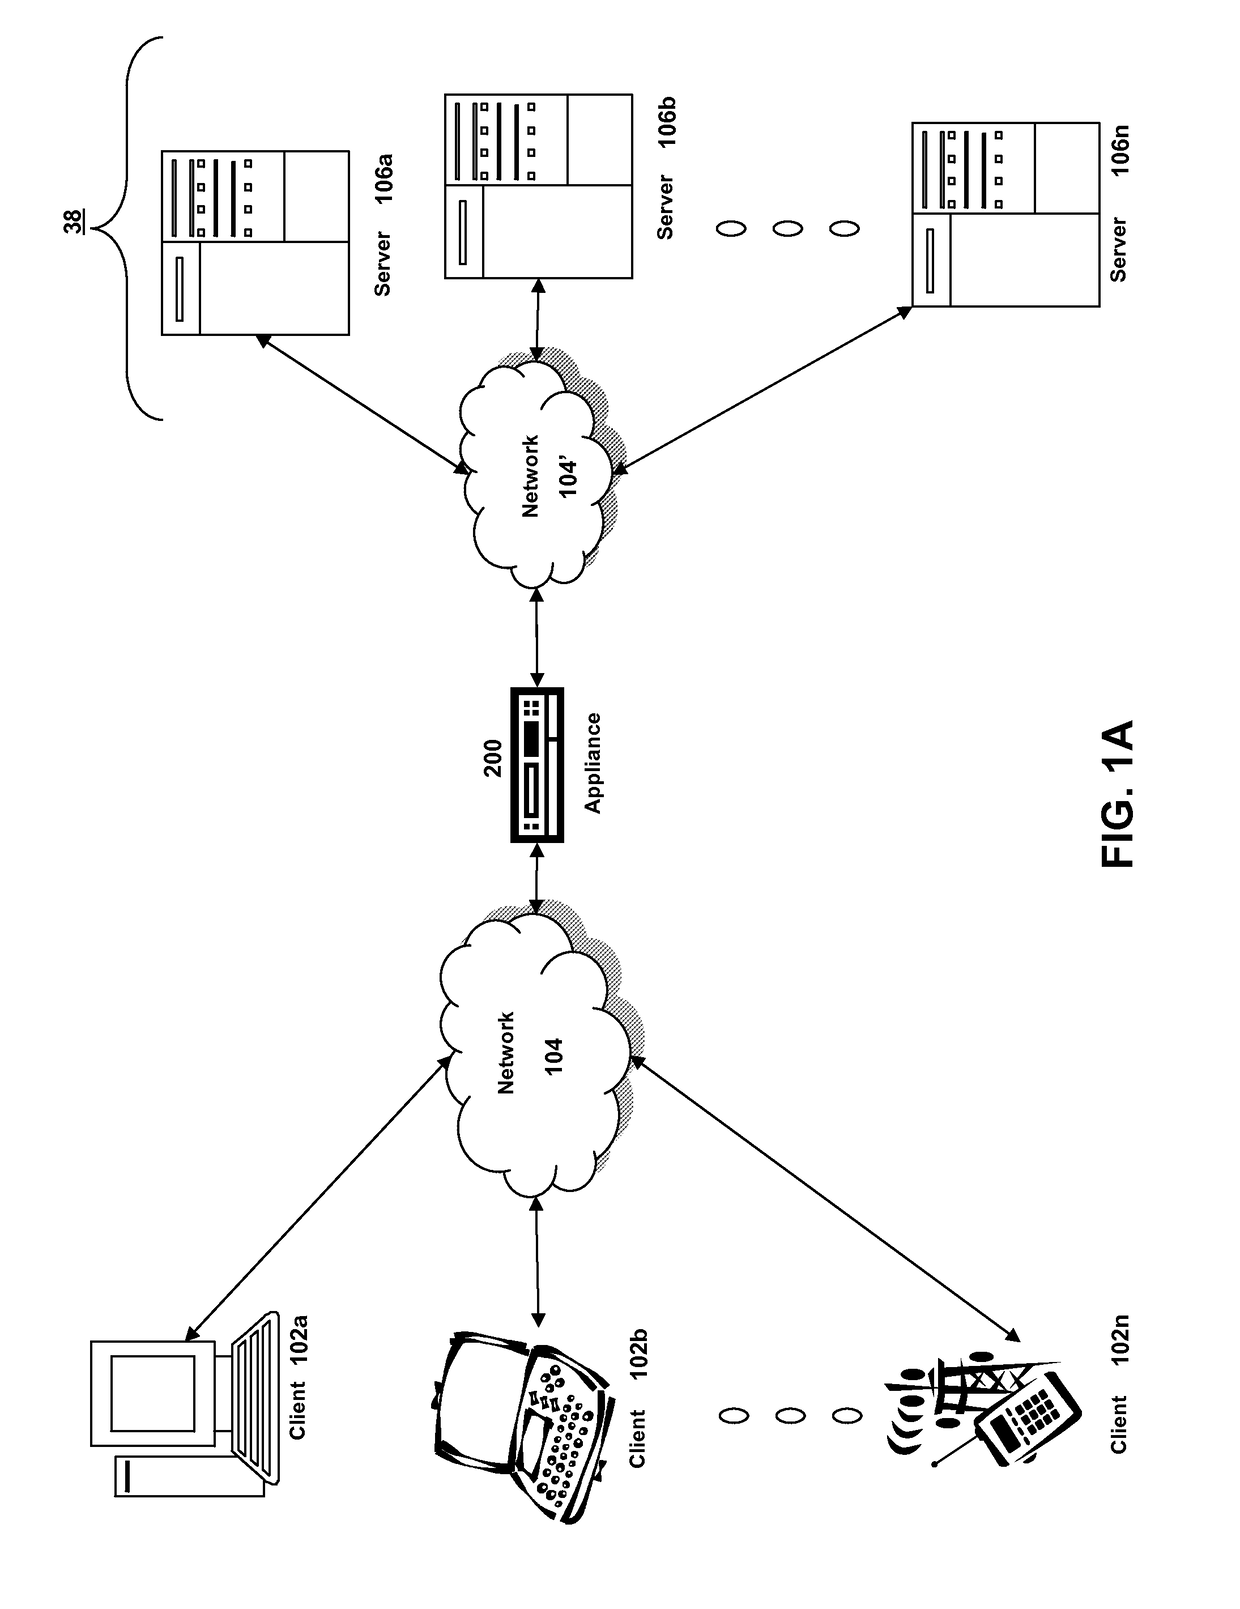 Systems and methods for adaptive application provisioning